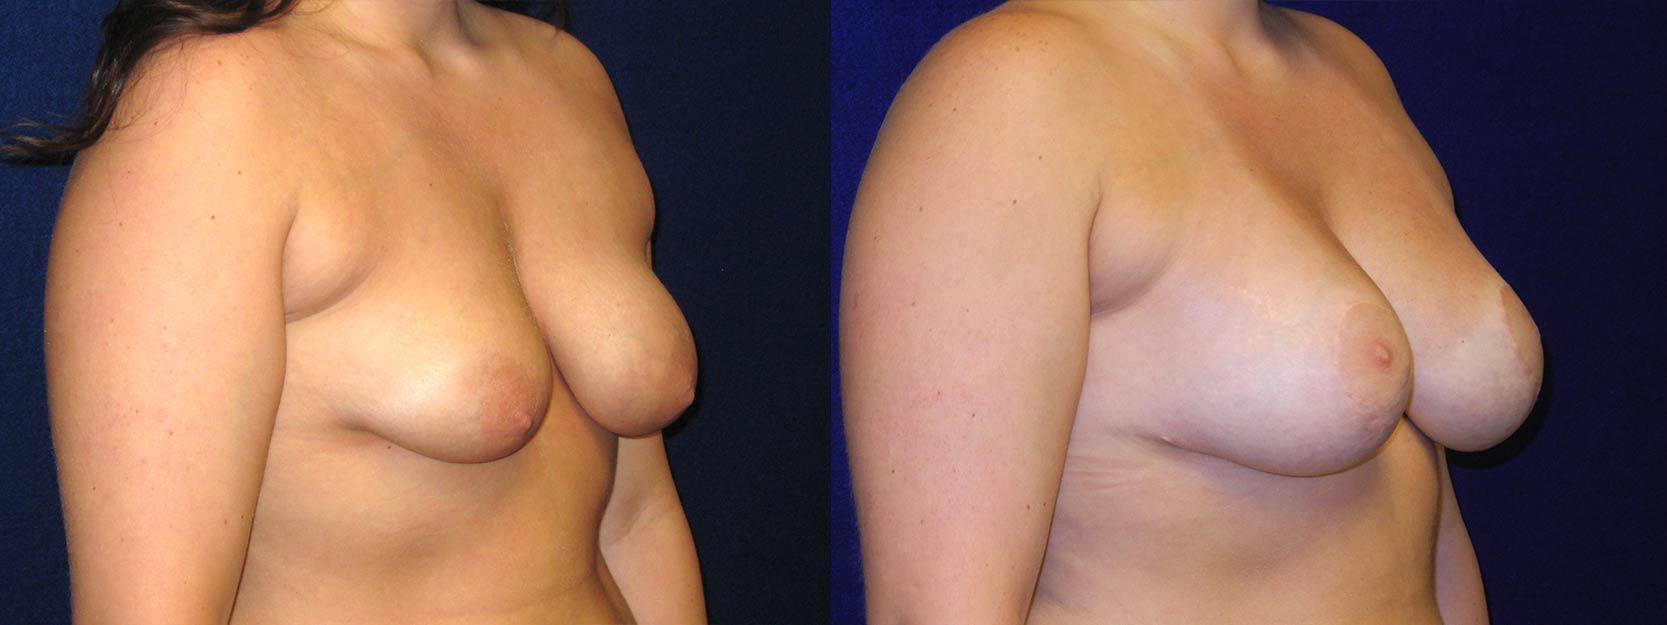 Right 3/4 View - Breast Augmentation with Lift - Silicone Implants